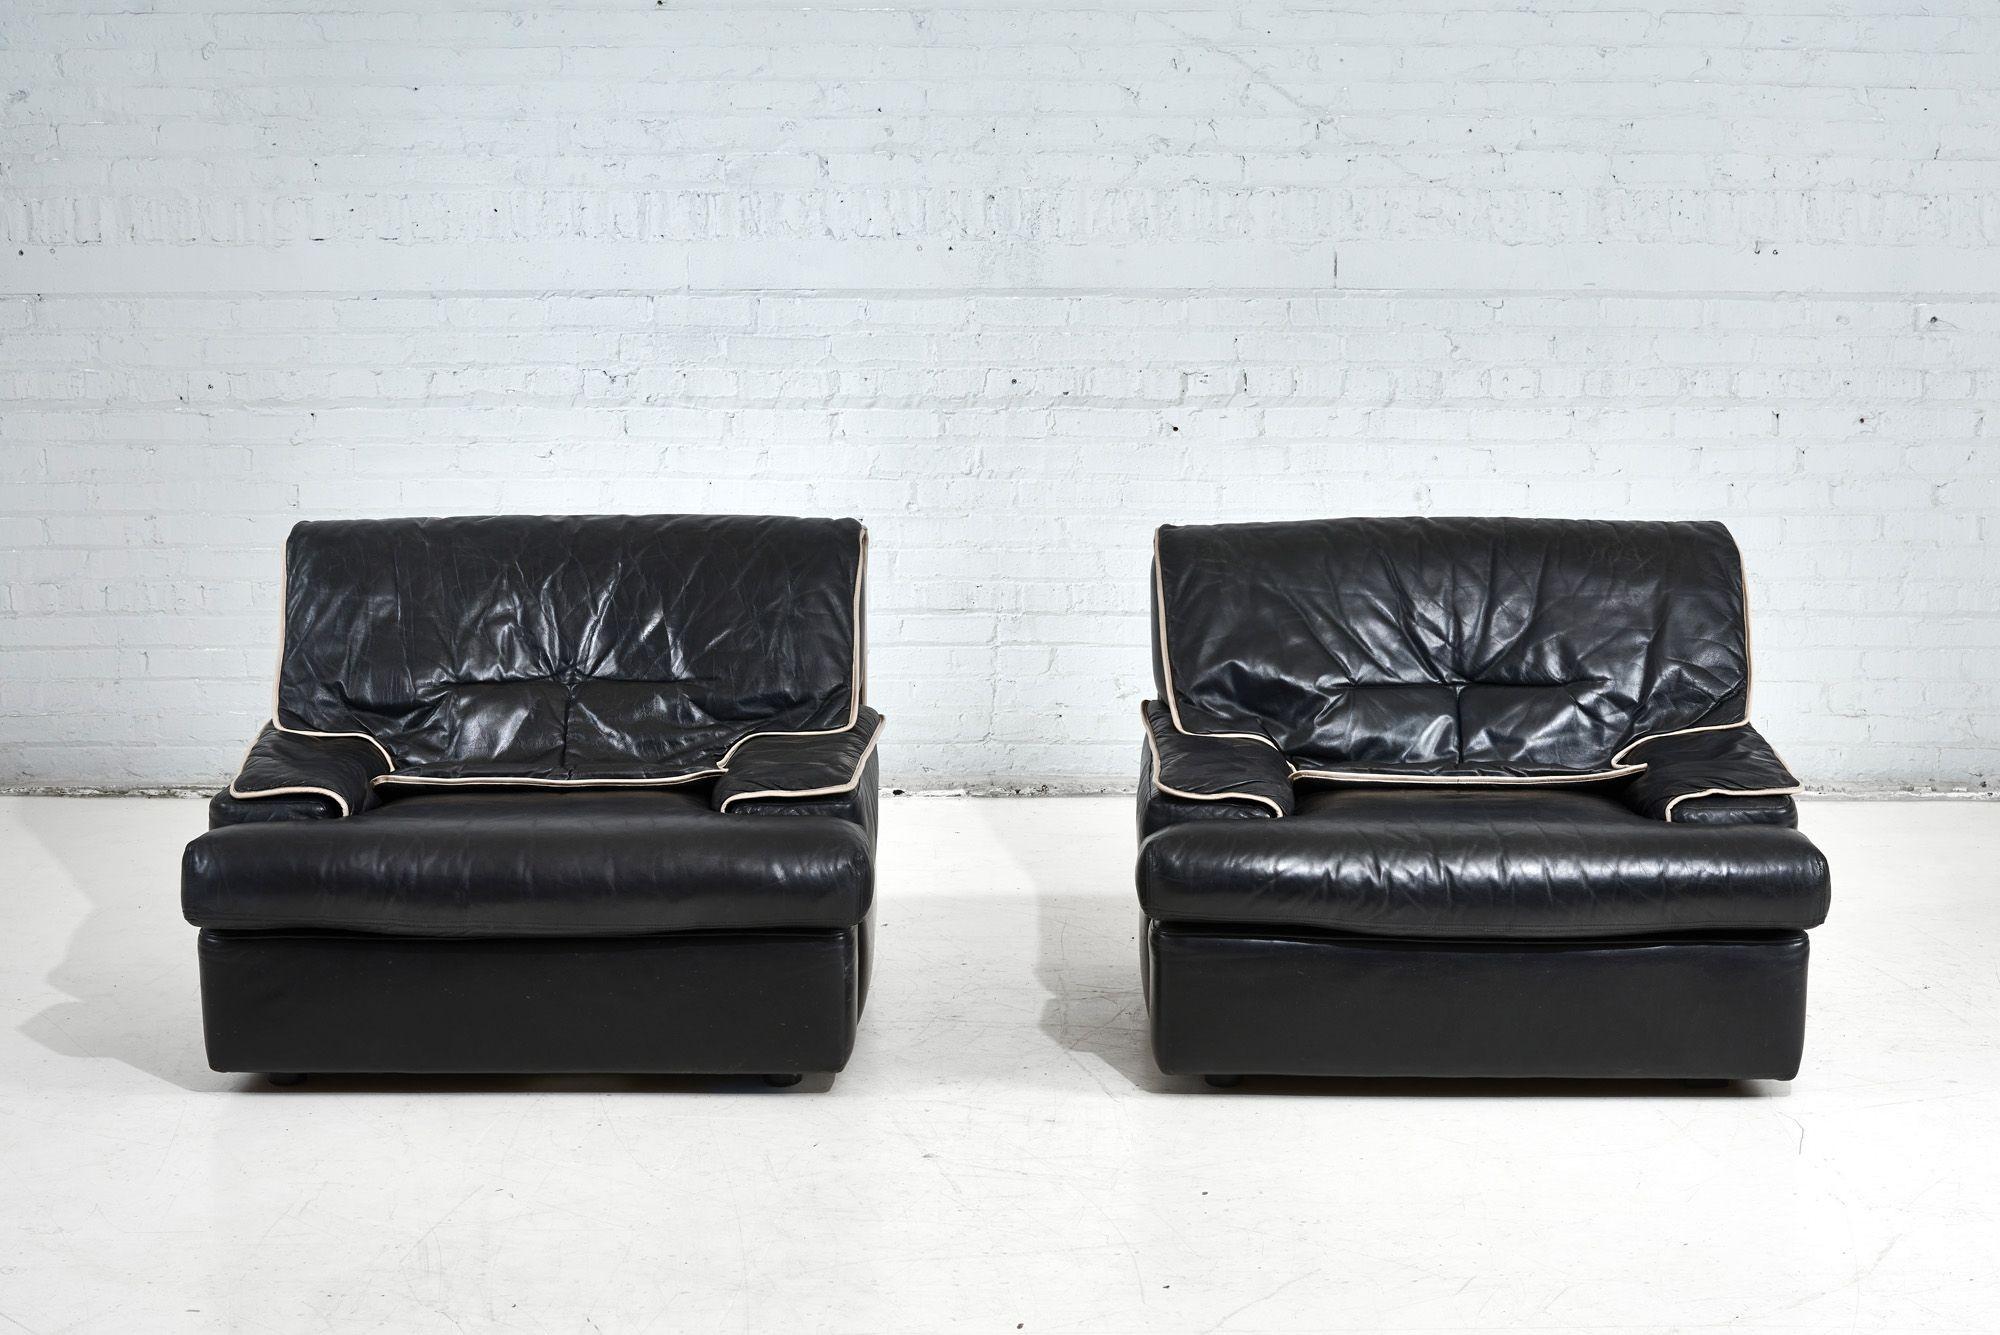 Pair Guido Faleschini black leather lounge chairs, Italy 1970. Original leather in excellent condition.